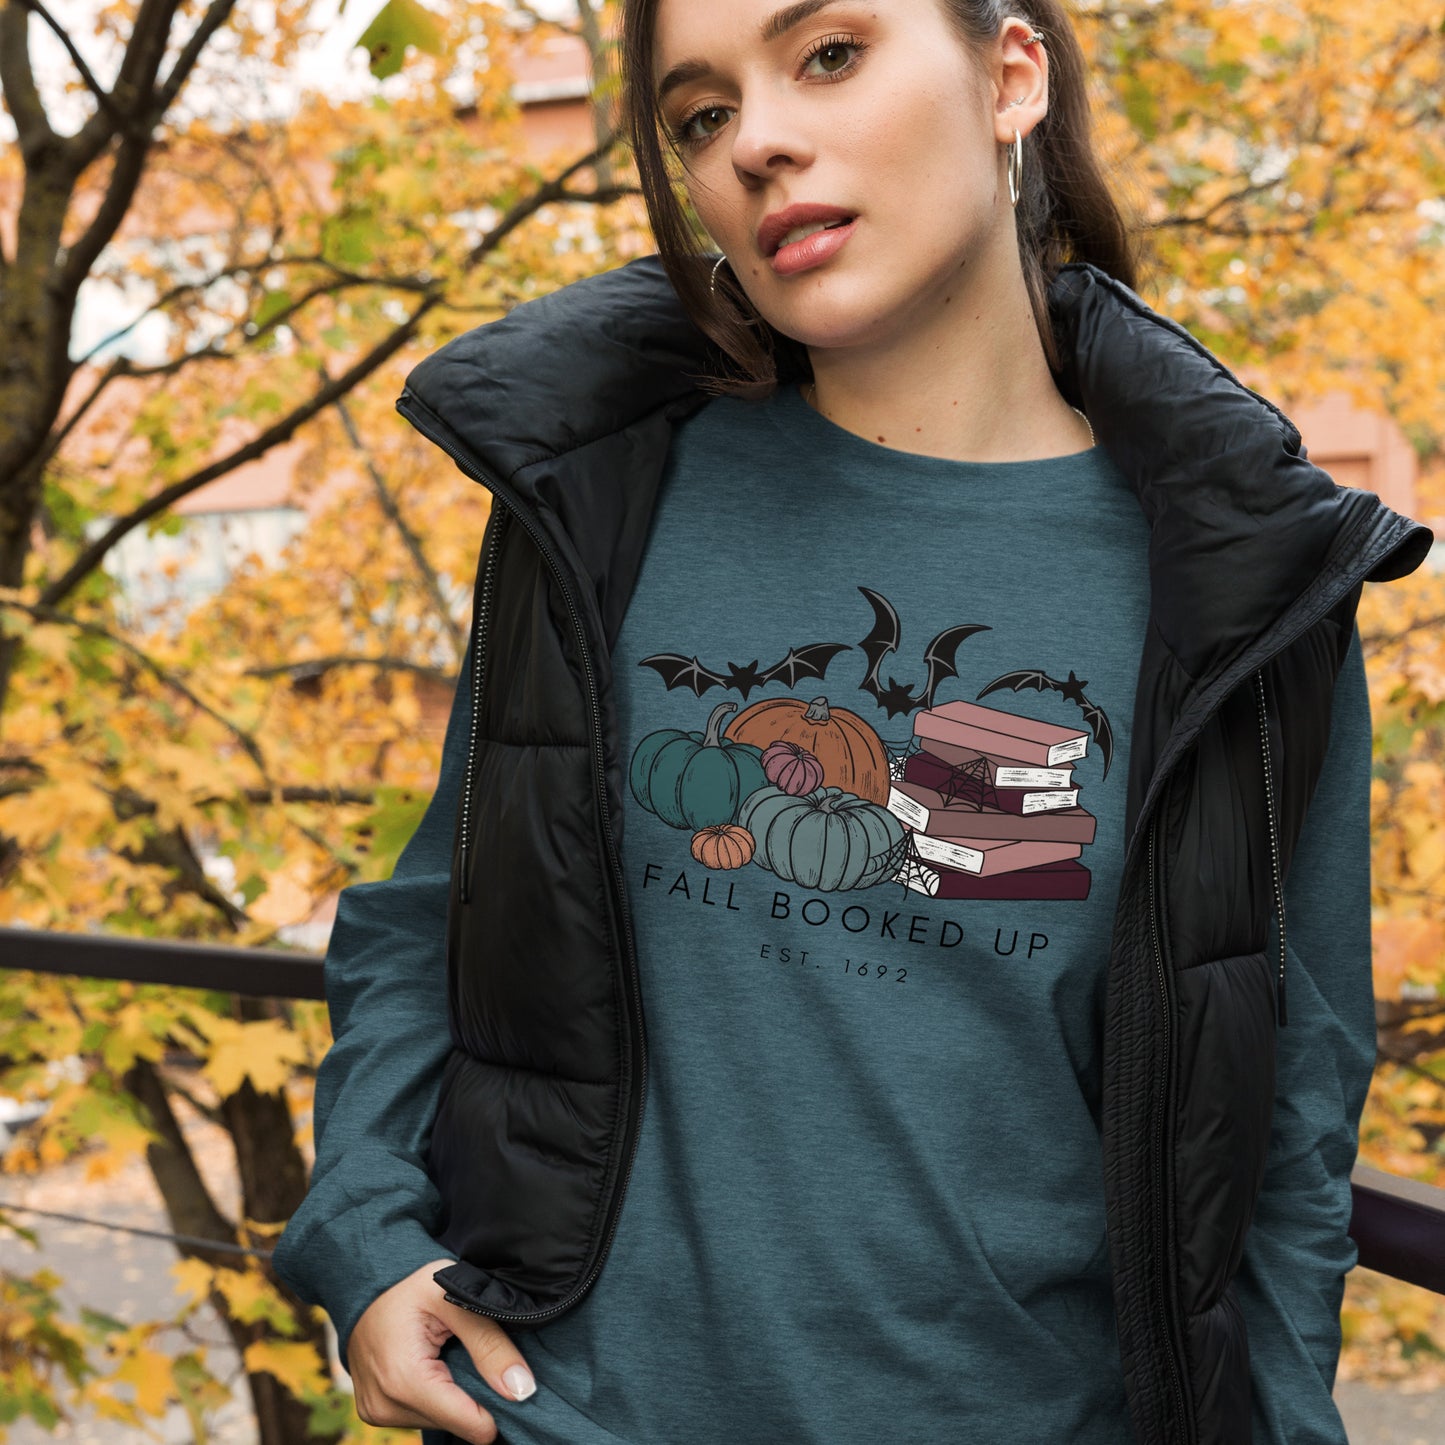 Fall Booked Up Unisex Long Sleeve Tee - Multicolor Books for FireDrake Artistry